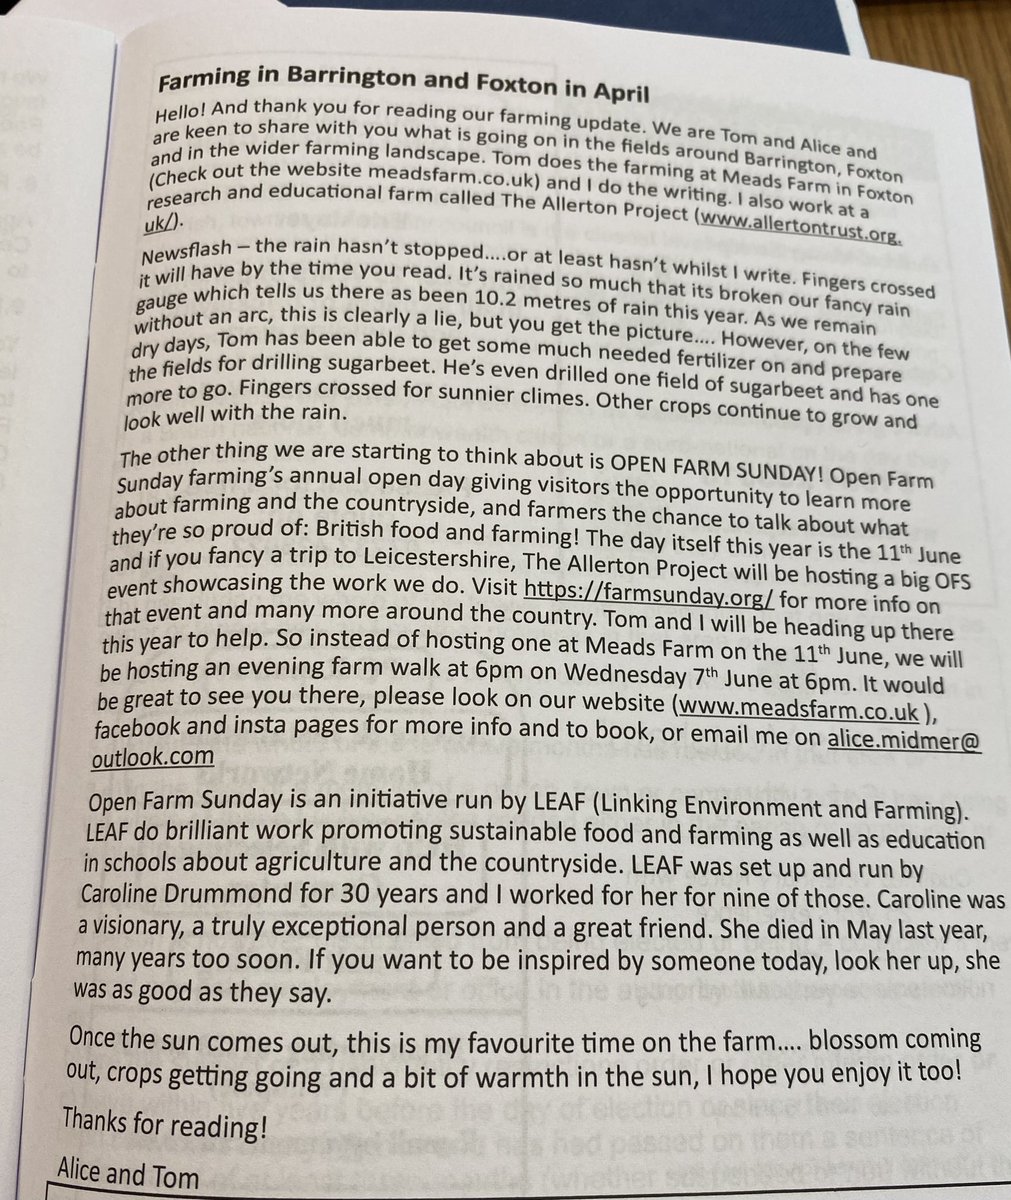 A shout out for @AllertonProject and @Meadsfarm @OpenFarmSunday events in May’s village newsletter update!

And for the mighty Caroline Drummond. A year on and goodness how I miss her. She will always be the voice on my shoulder, I hope she’s yours too 🫵 #whatwouldCDdo #bebetter